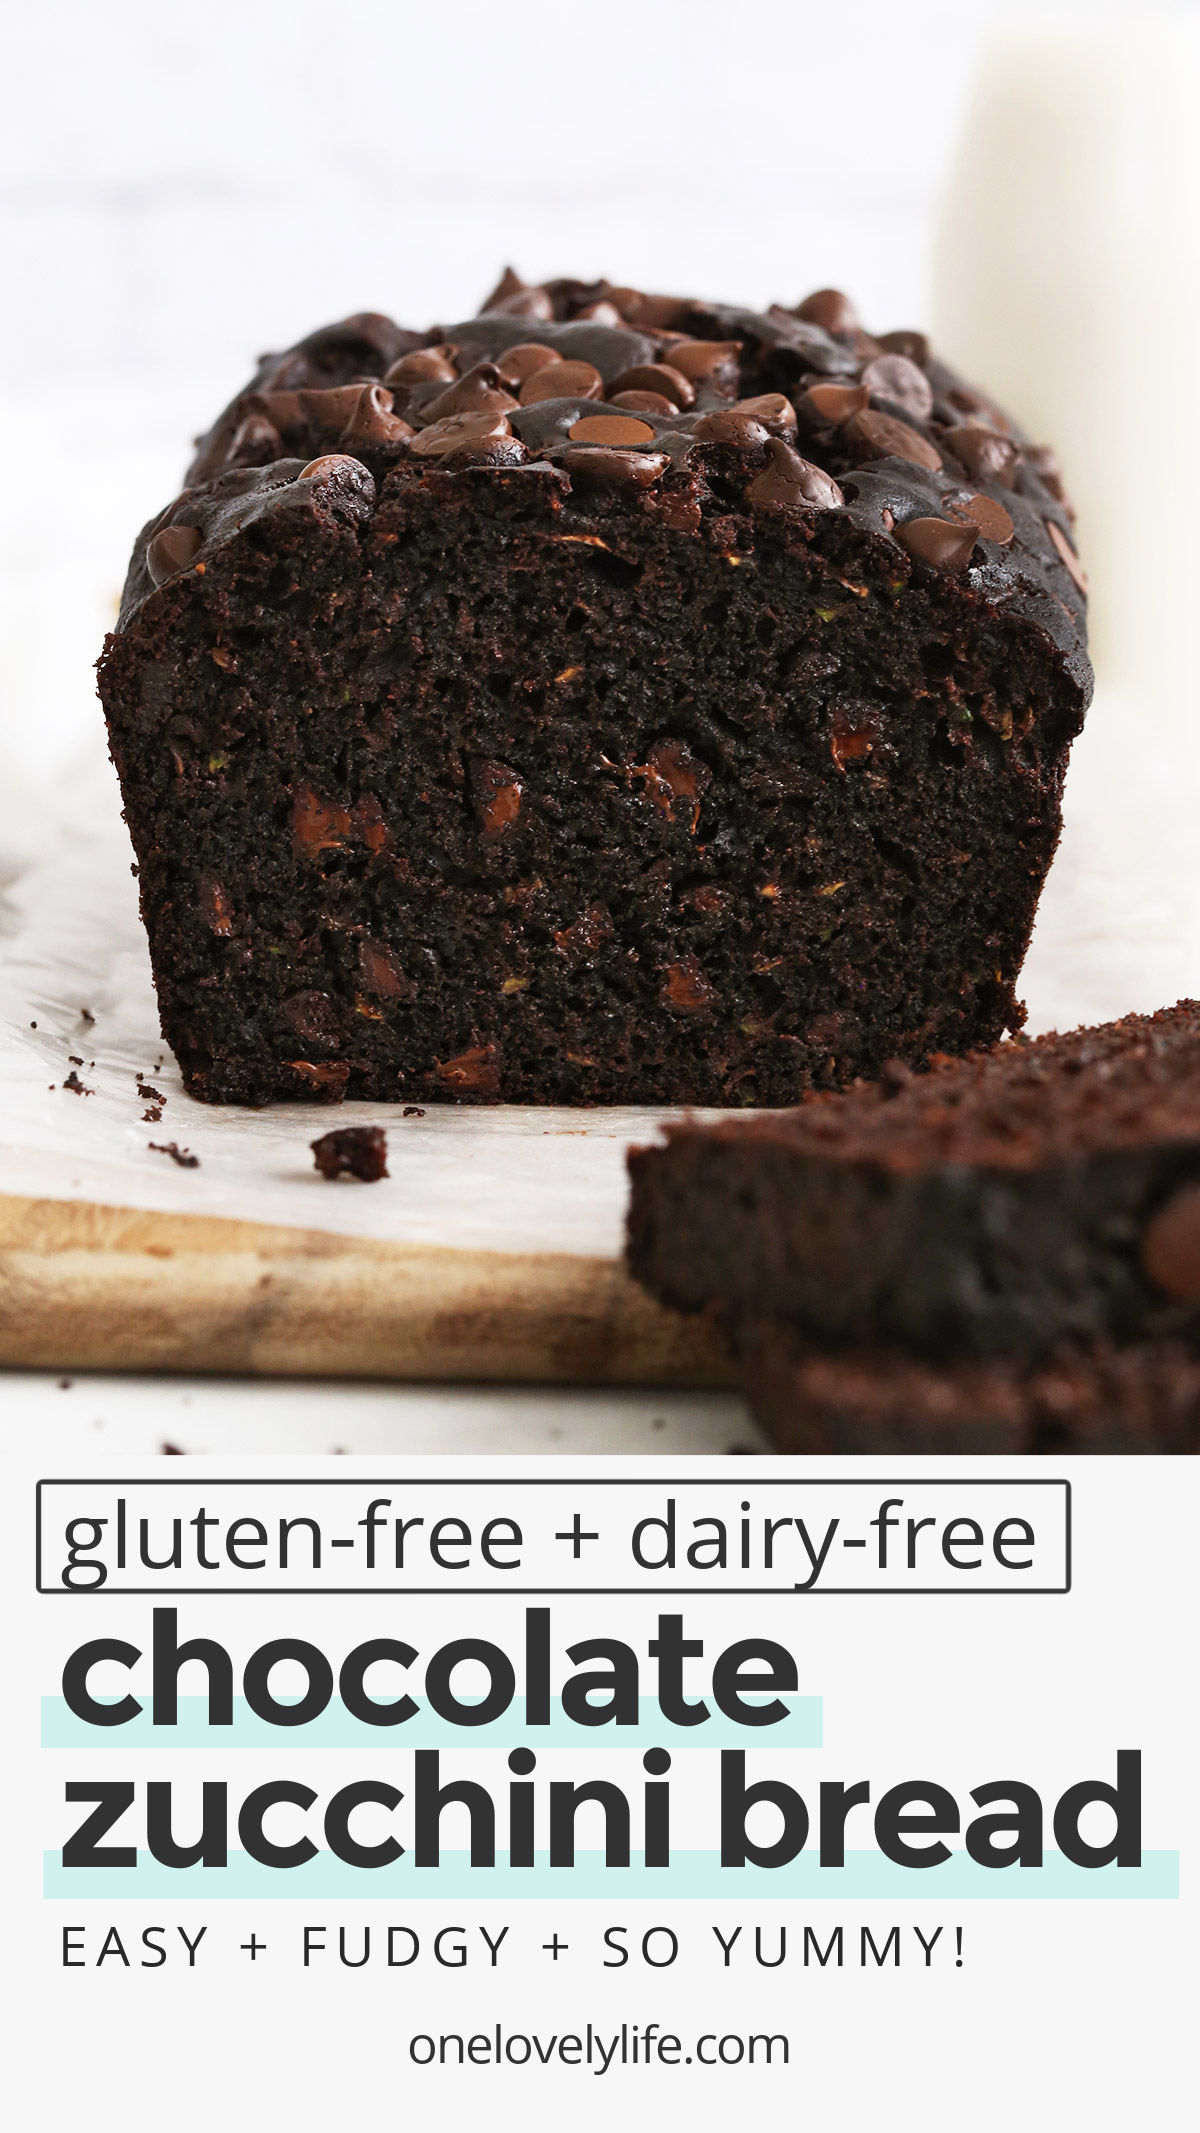 Gluten-Free Chocolate Zucchini Bread - This ultra chocolatey gluten-free zucchini bread is AMAZING. The perfect way to use up extra zucchini in the summer! (Gluten-Free, Dairy-Free) // Gluten Free Zucchini Bread Recipe // Chocolate Chip Zucchini Bread Recipe // Gluten Free Baking #glutenfree #chocolate #zucchini #zucchinibread